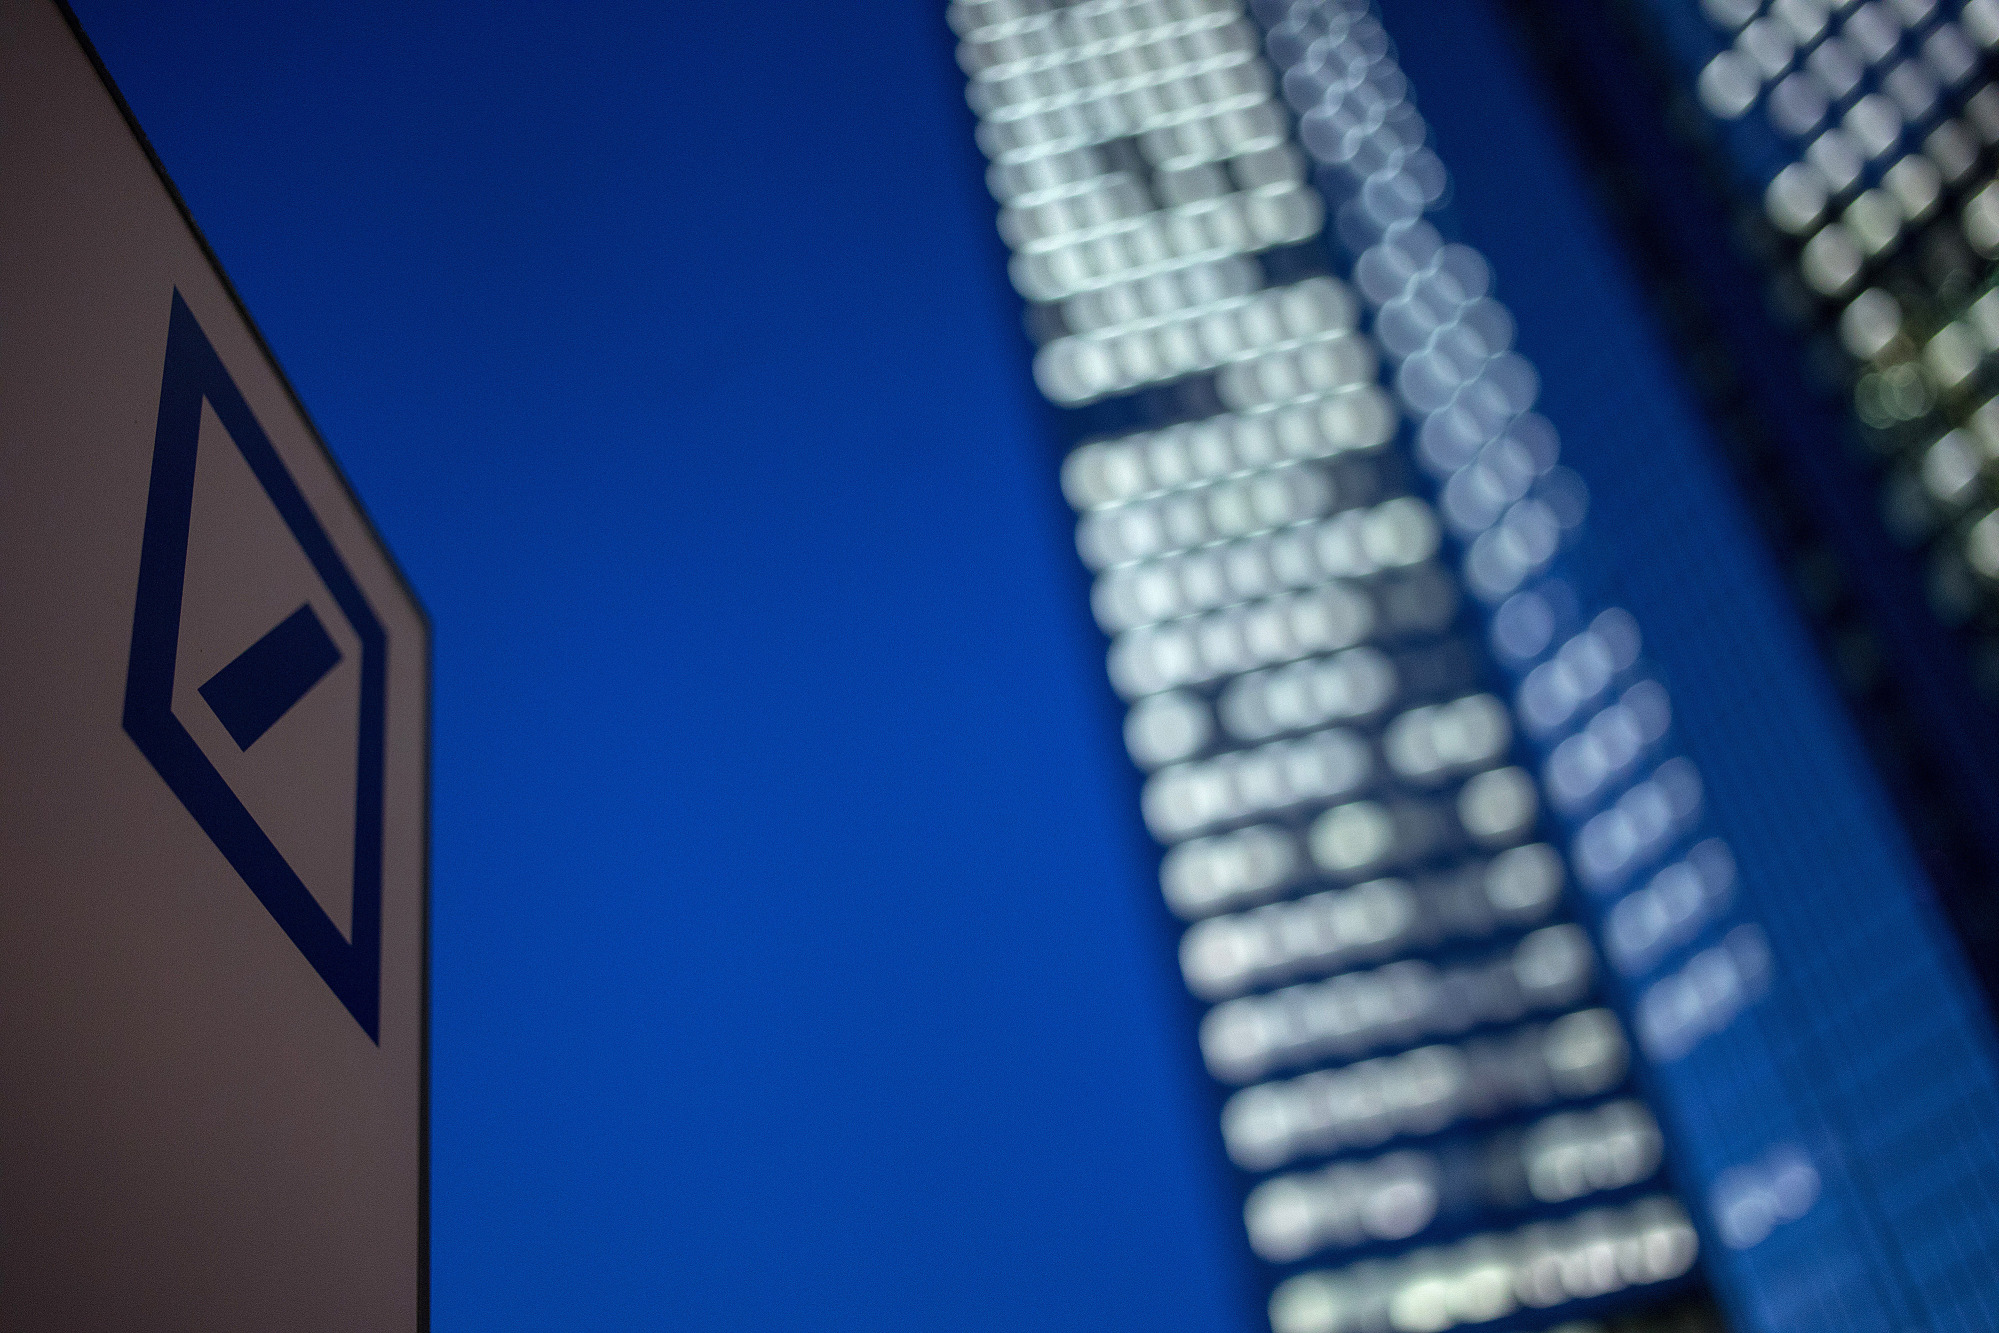 A logo sits on a sign outside the Deutsche Bank AG headquarters skyscraper buildings at night in Frankfurt, Germany.